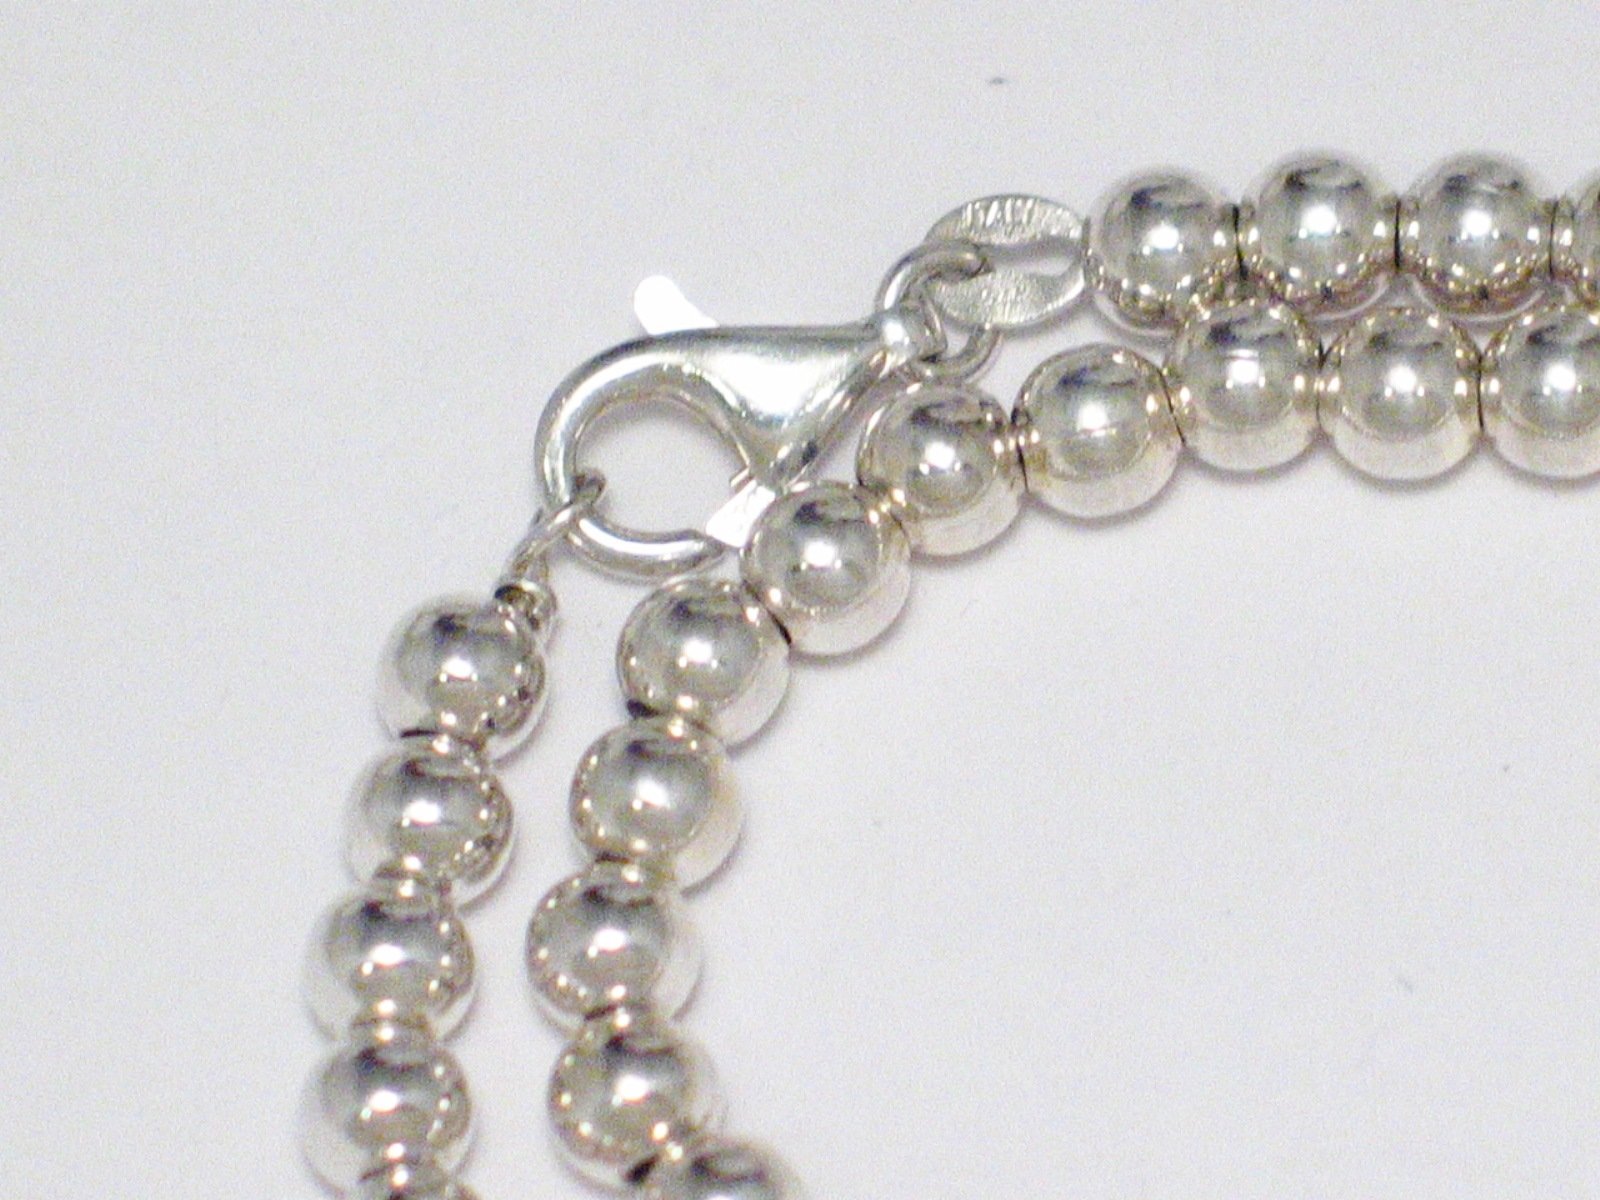 Ball Chain Necklace, 20.25" 5mm Round Sterling Silver Bead Chain Necklace -  Online at Blingschlingers